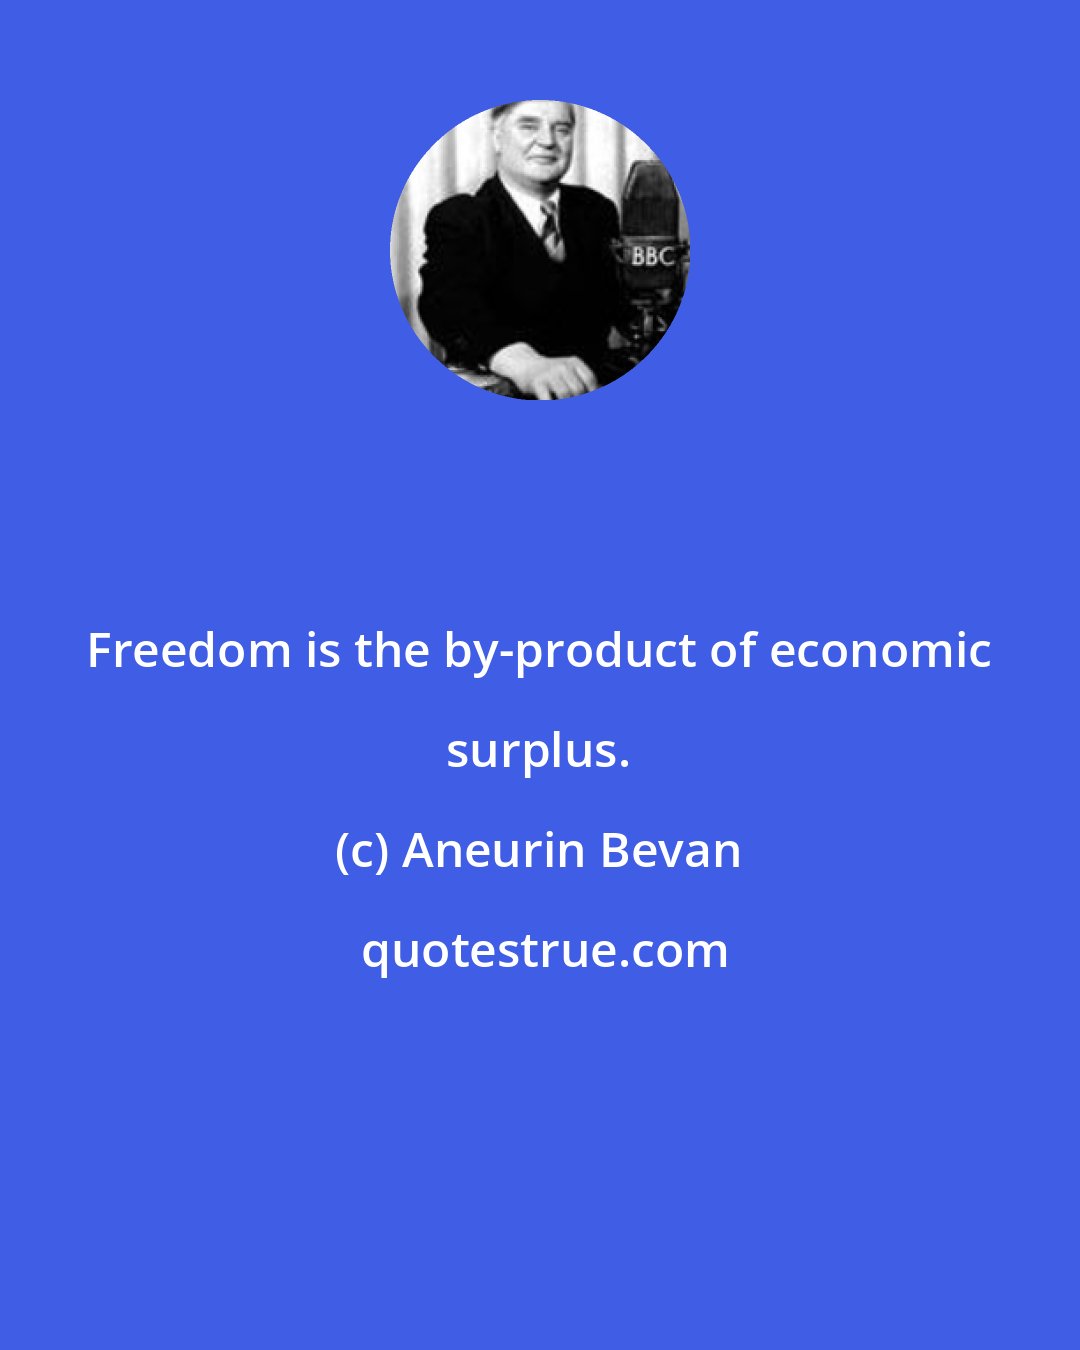 Aneurin Bevan: Freedom is the by-product of economic surplus.